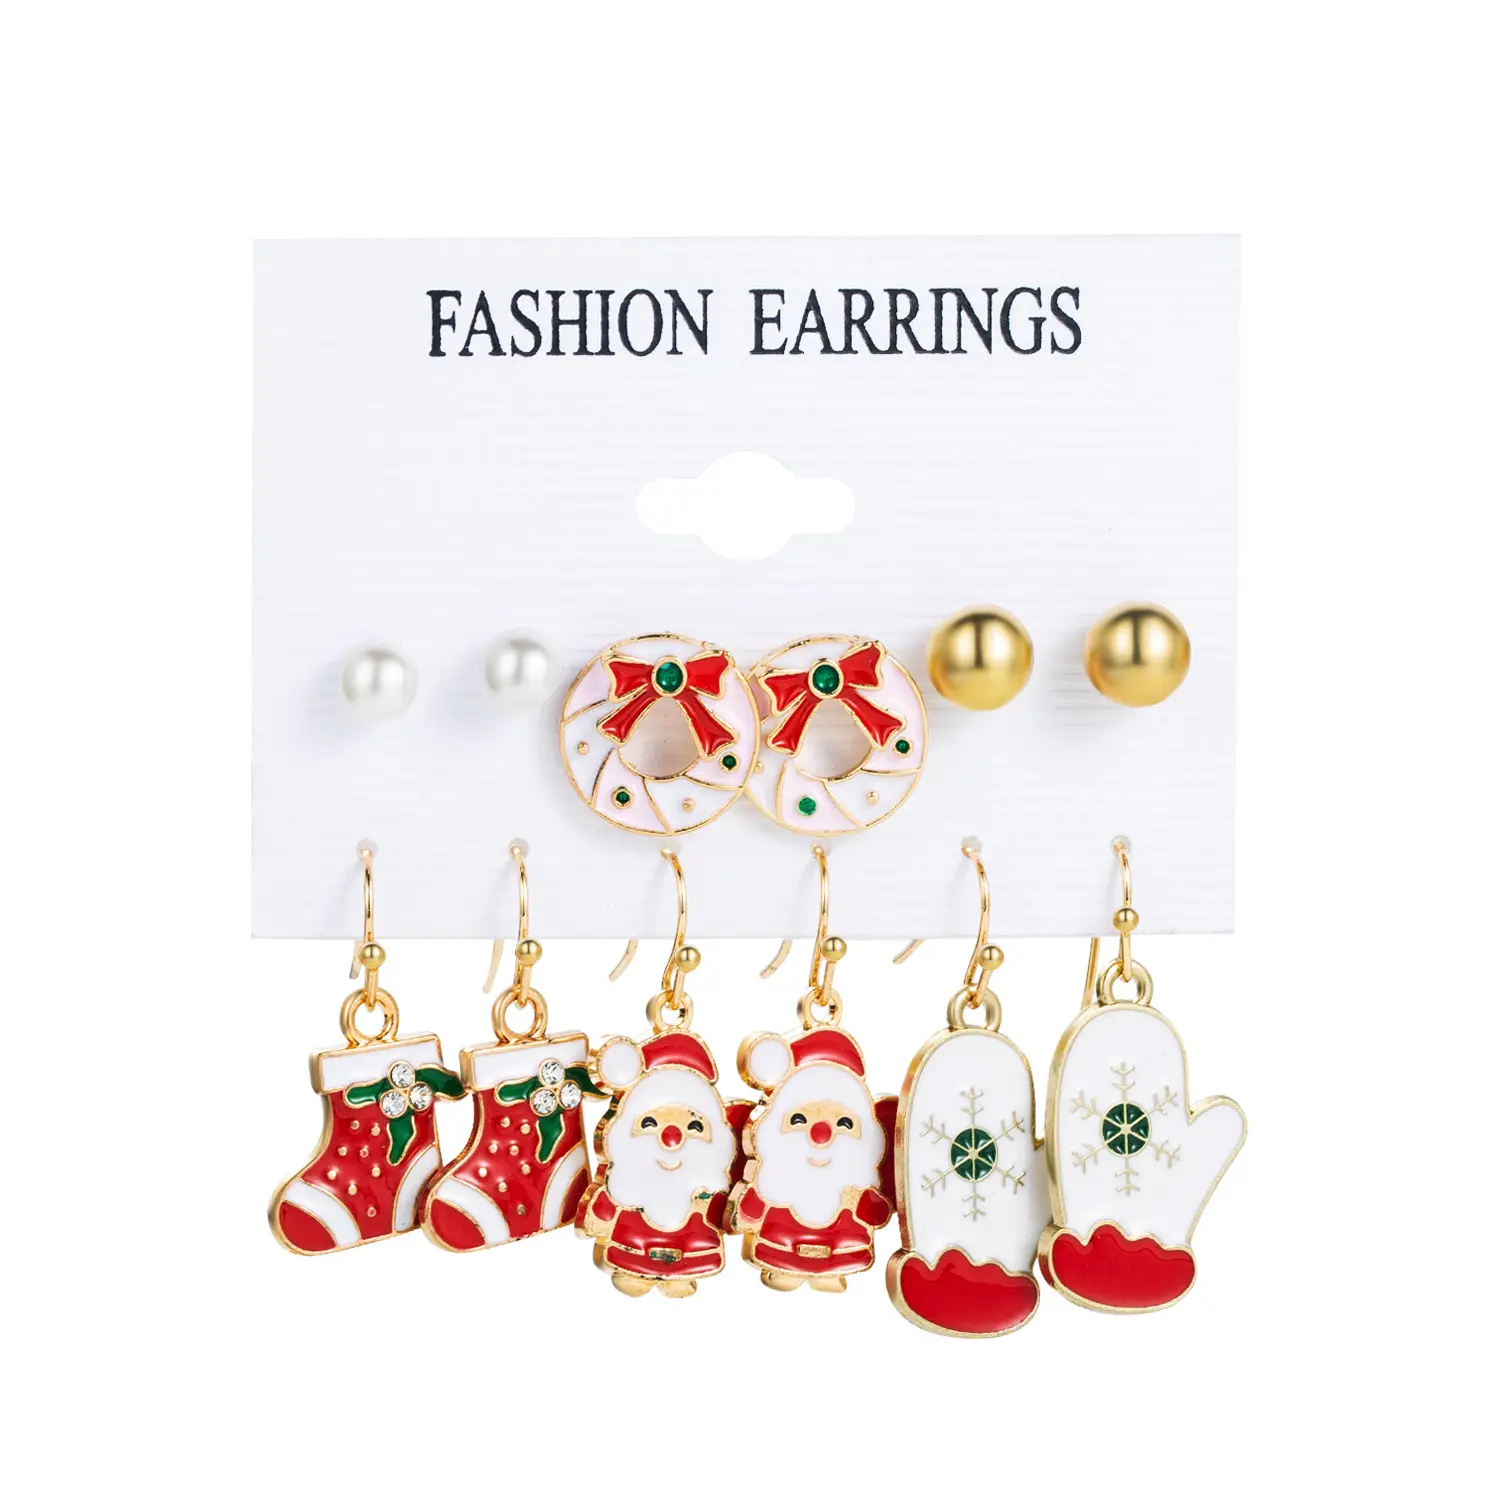 Christmas earrings set 6 sets of Santa Claus Snowman Christmas tree earrings for promotion manufacturer